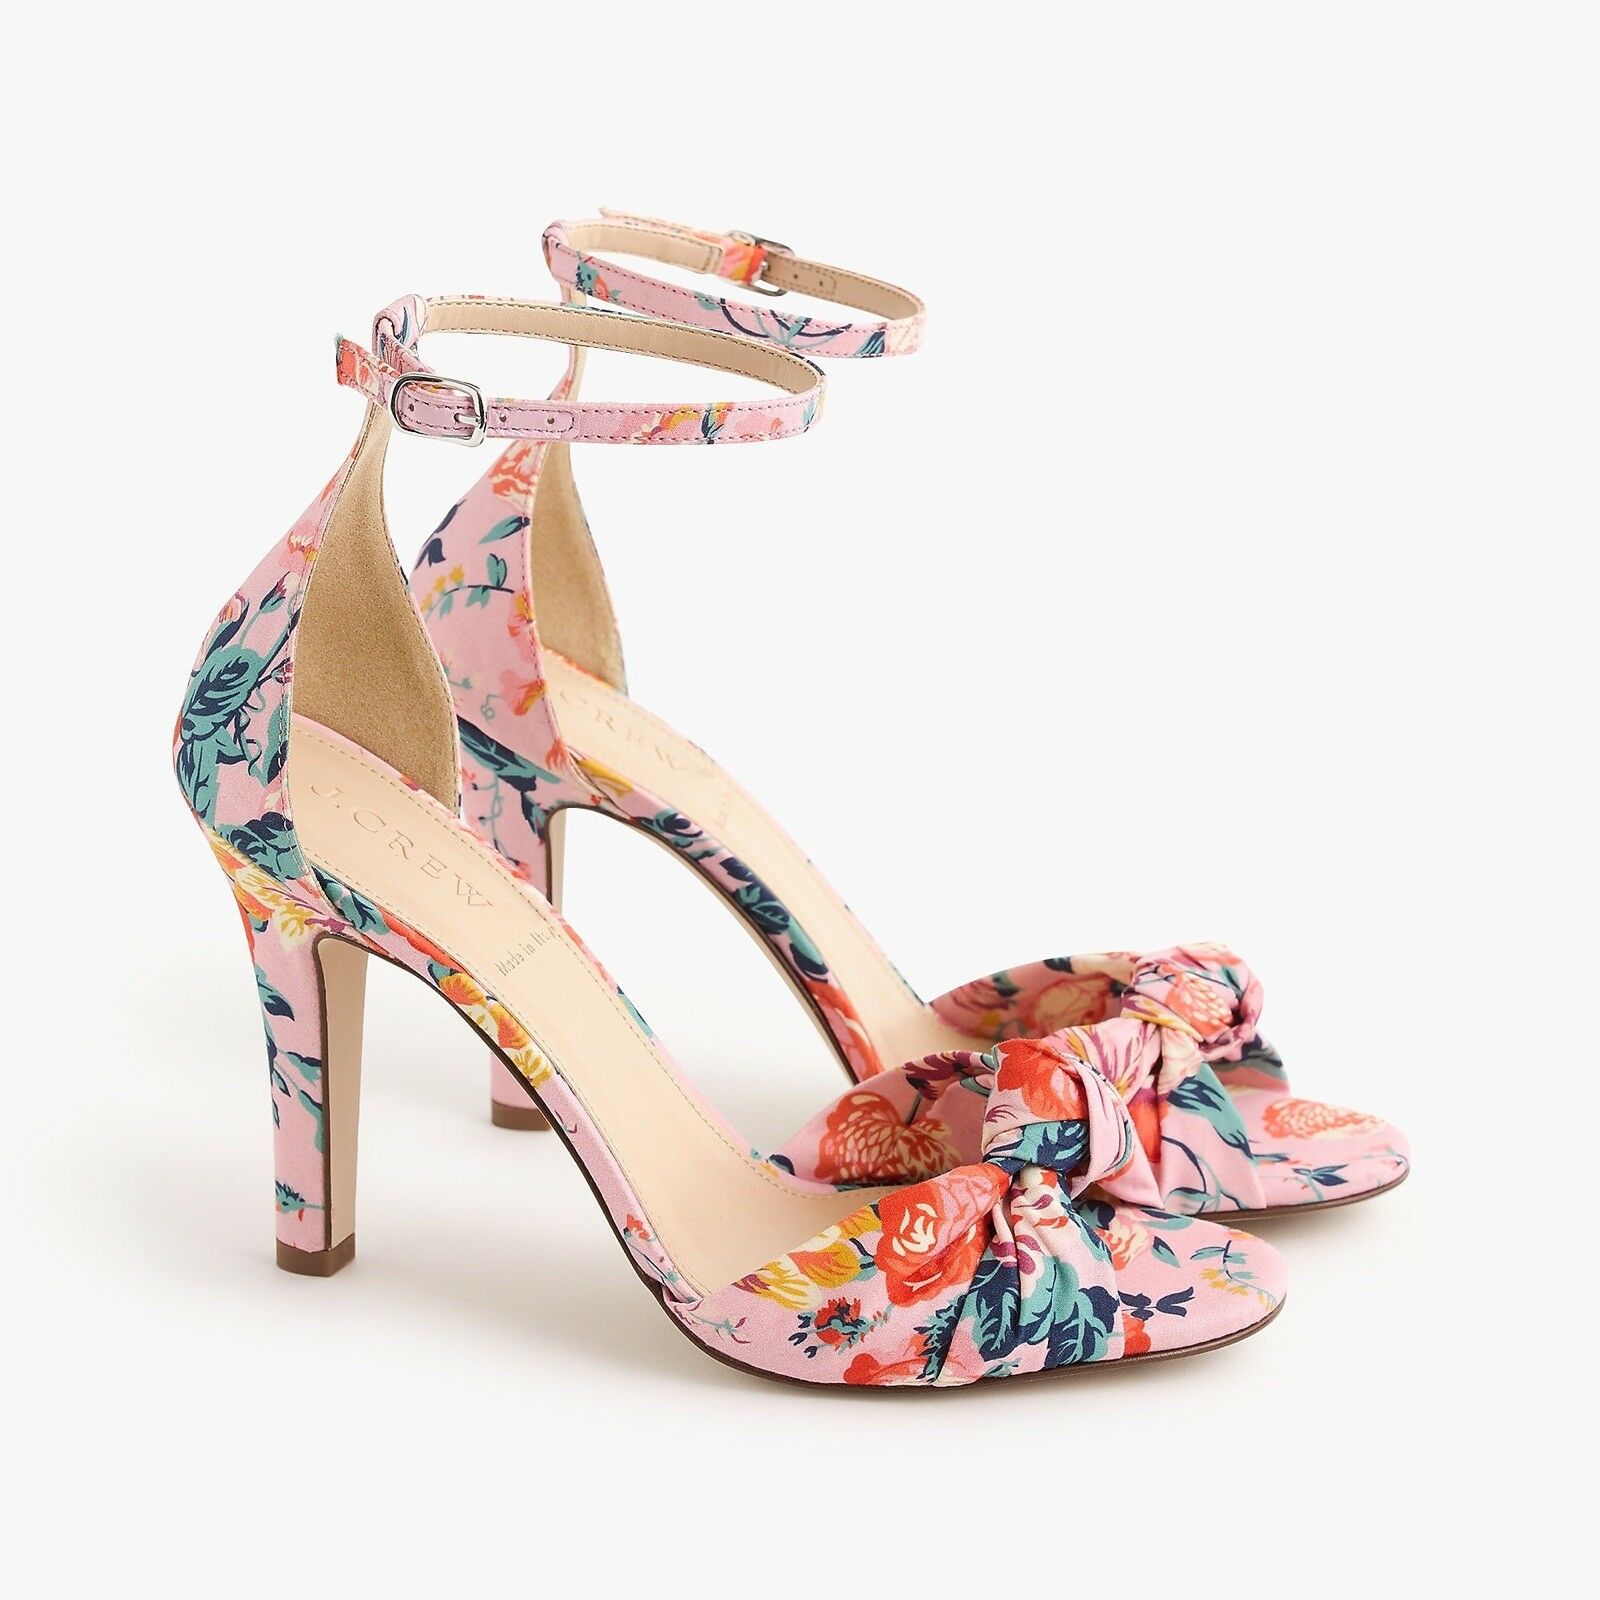 Knotted High Heel Sandals In Liberty Floral Jcrew Collection Size 11